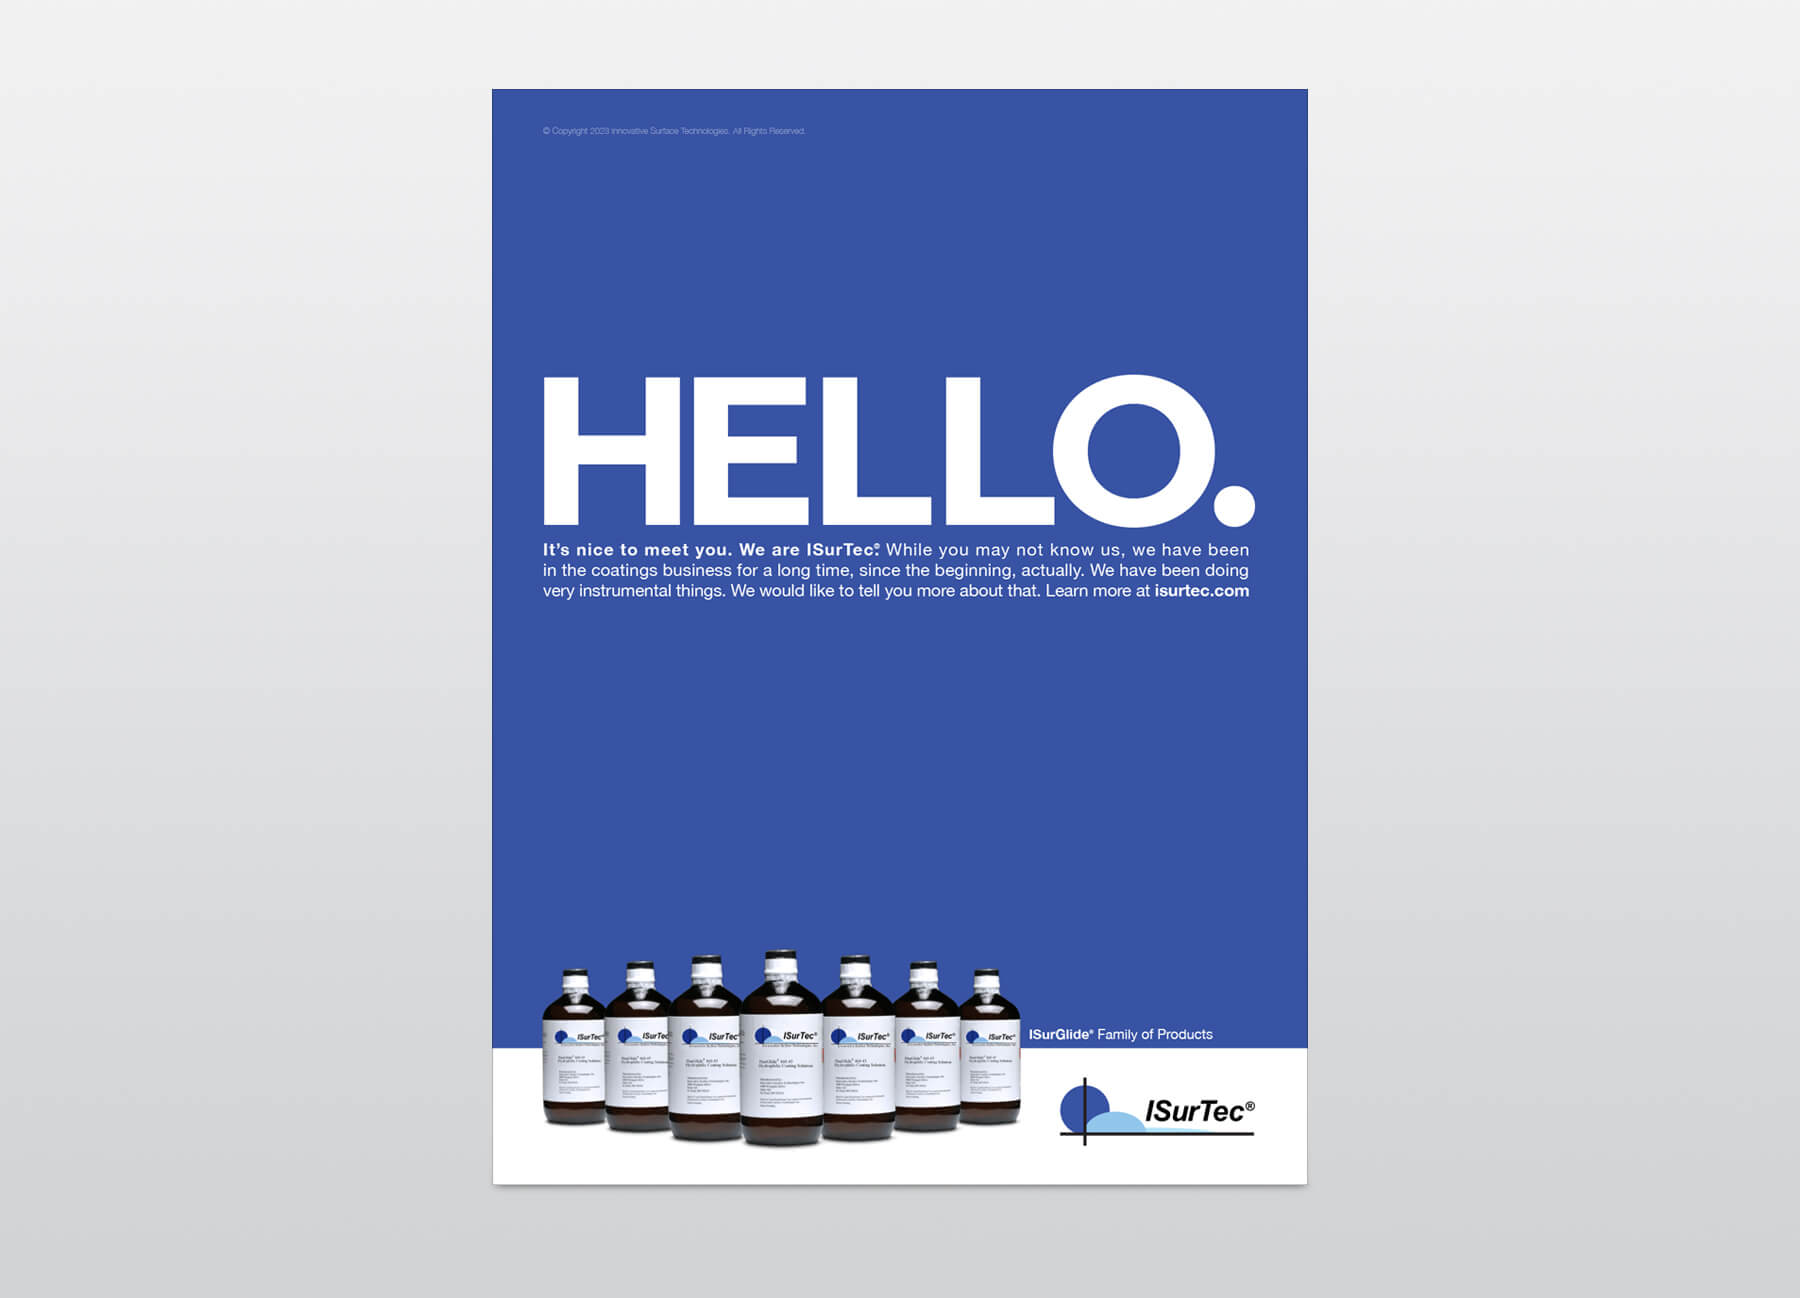 Text: Hello. Graphic is a full page add with the word Hello written very largely at center. Directly bellow Hello is copy that is a bit toosmall to read but the first few words say, "It's nice to meet you. We are ISurTec®." Along the bottom of the ad are an array of bottles of the product with ISurTec logo. 